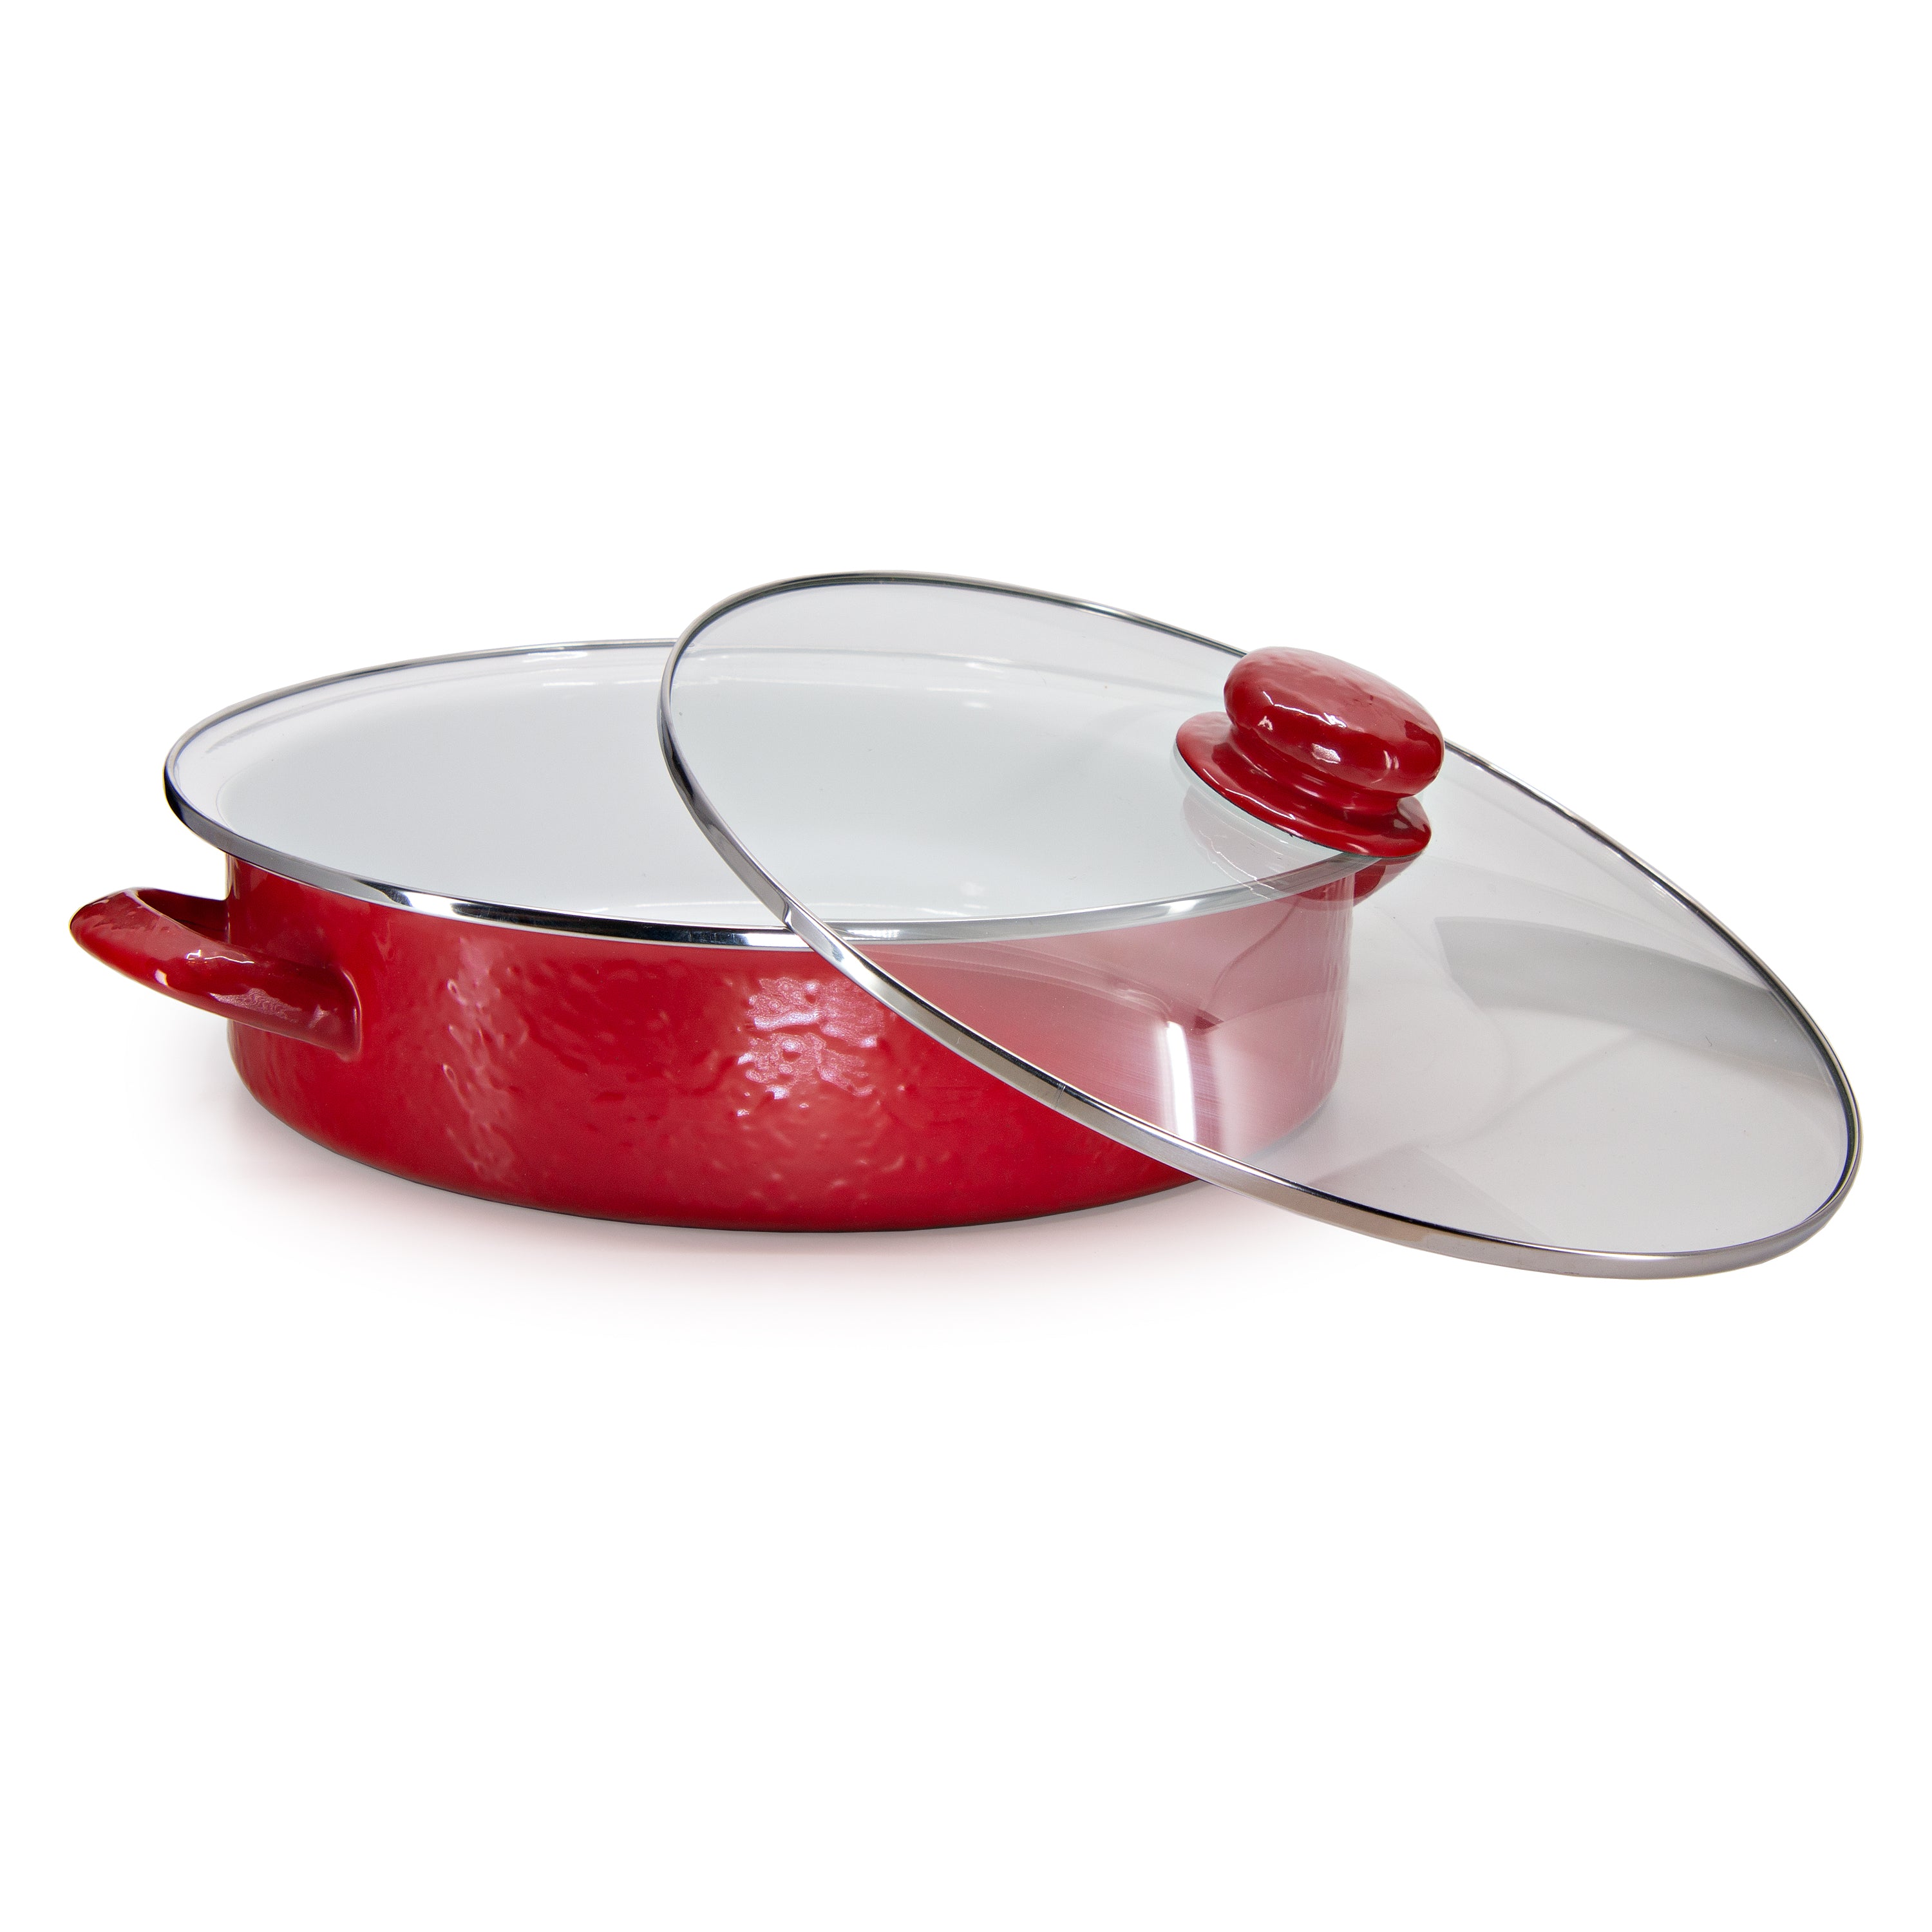 Solid Red Large Saute Pan by Golden Rabbit